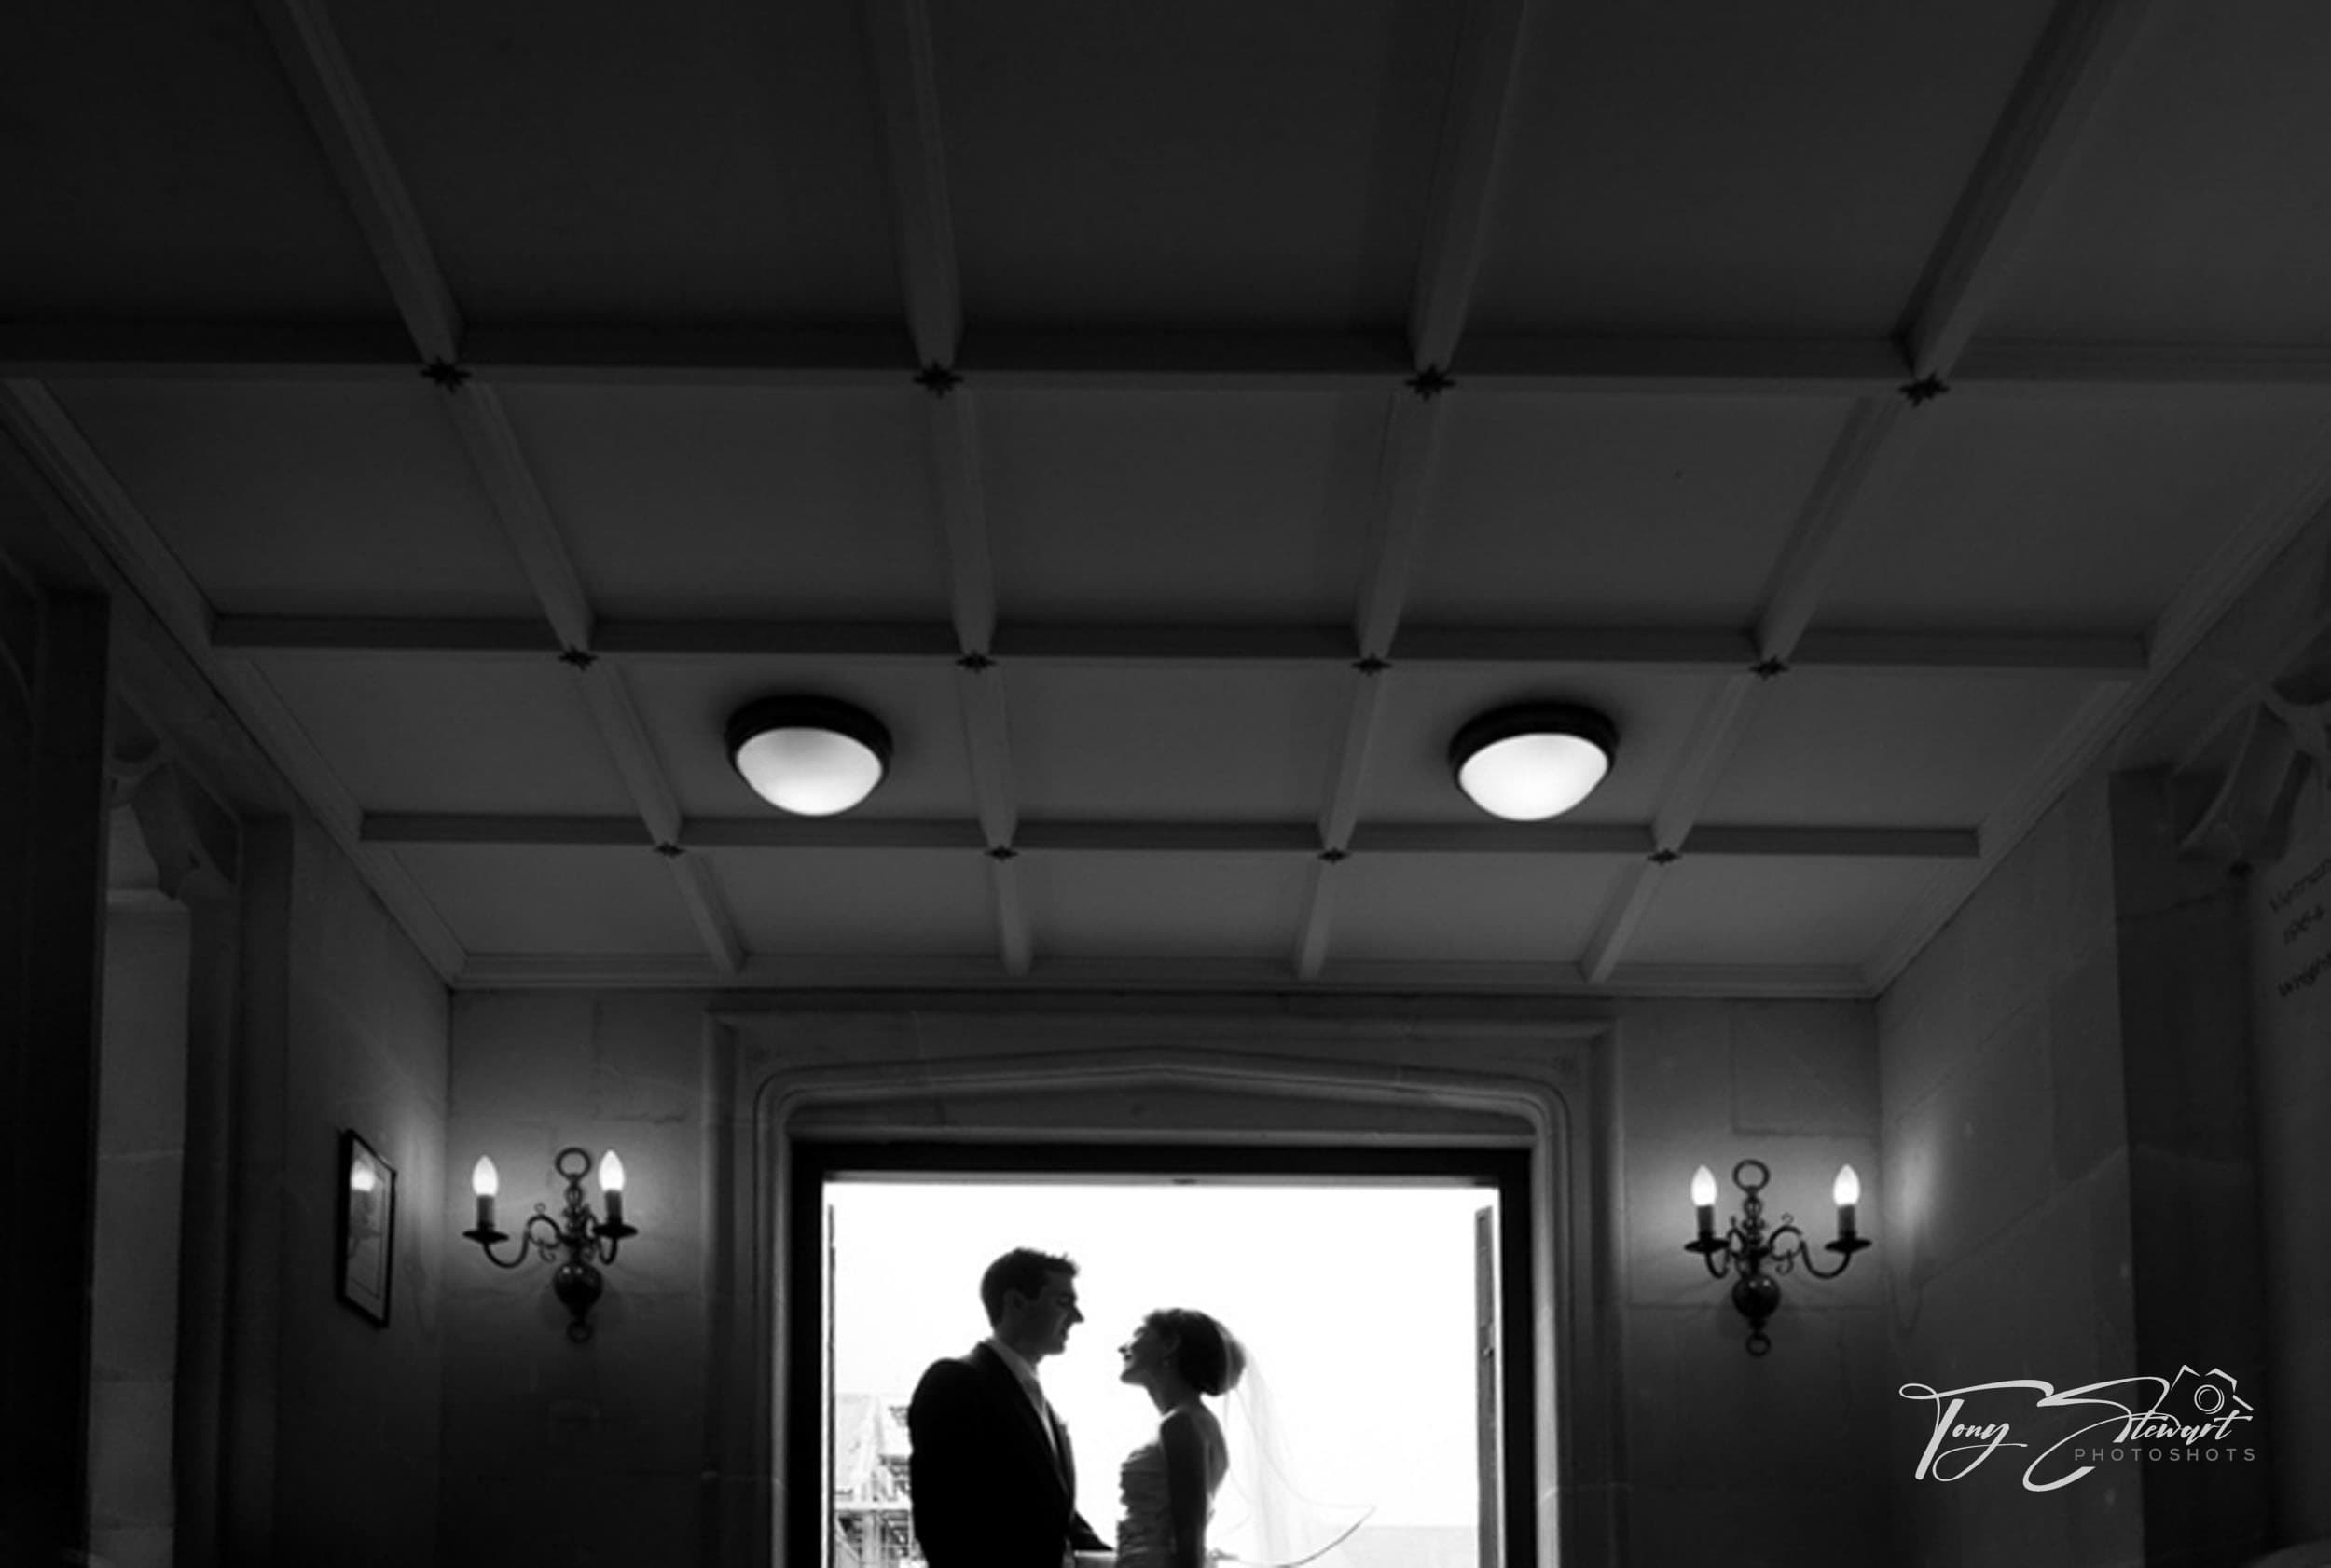 Couple silhoutetted in doorway on their wedding day.